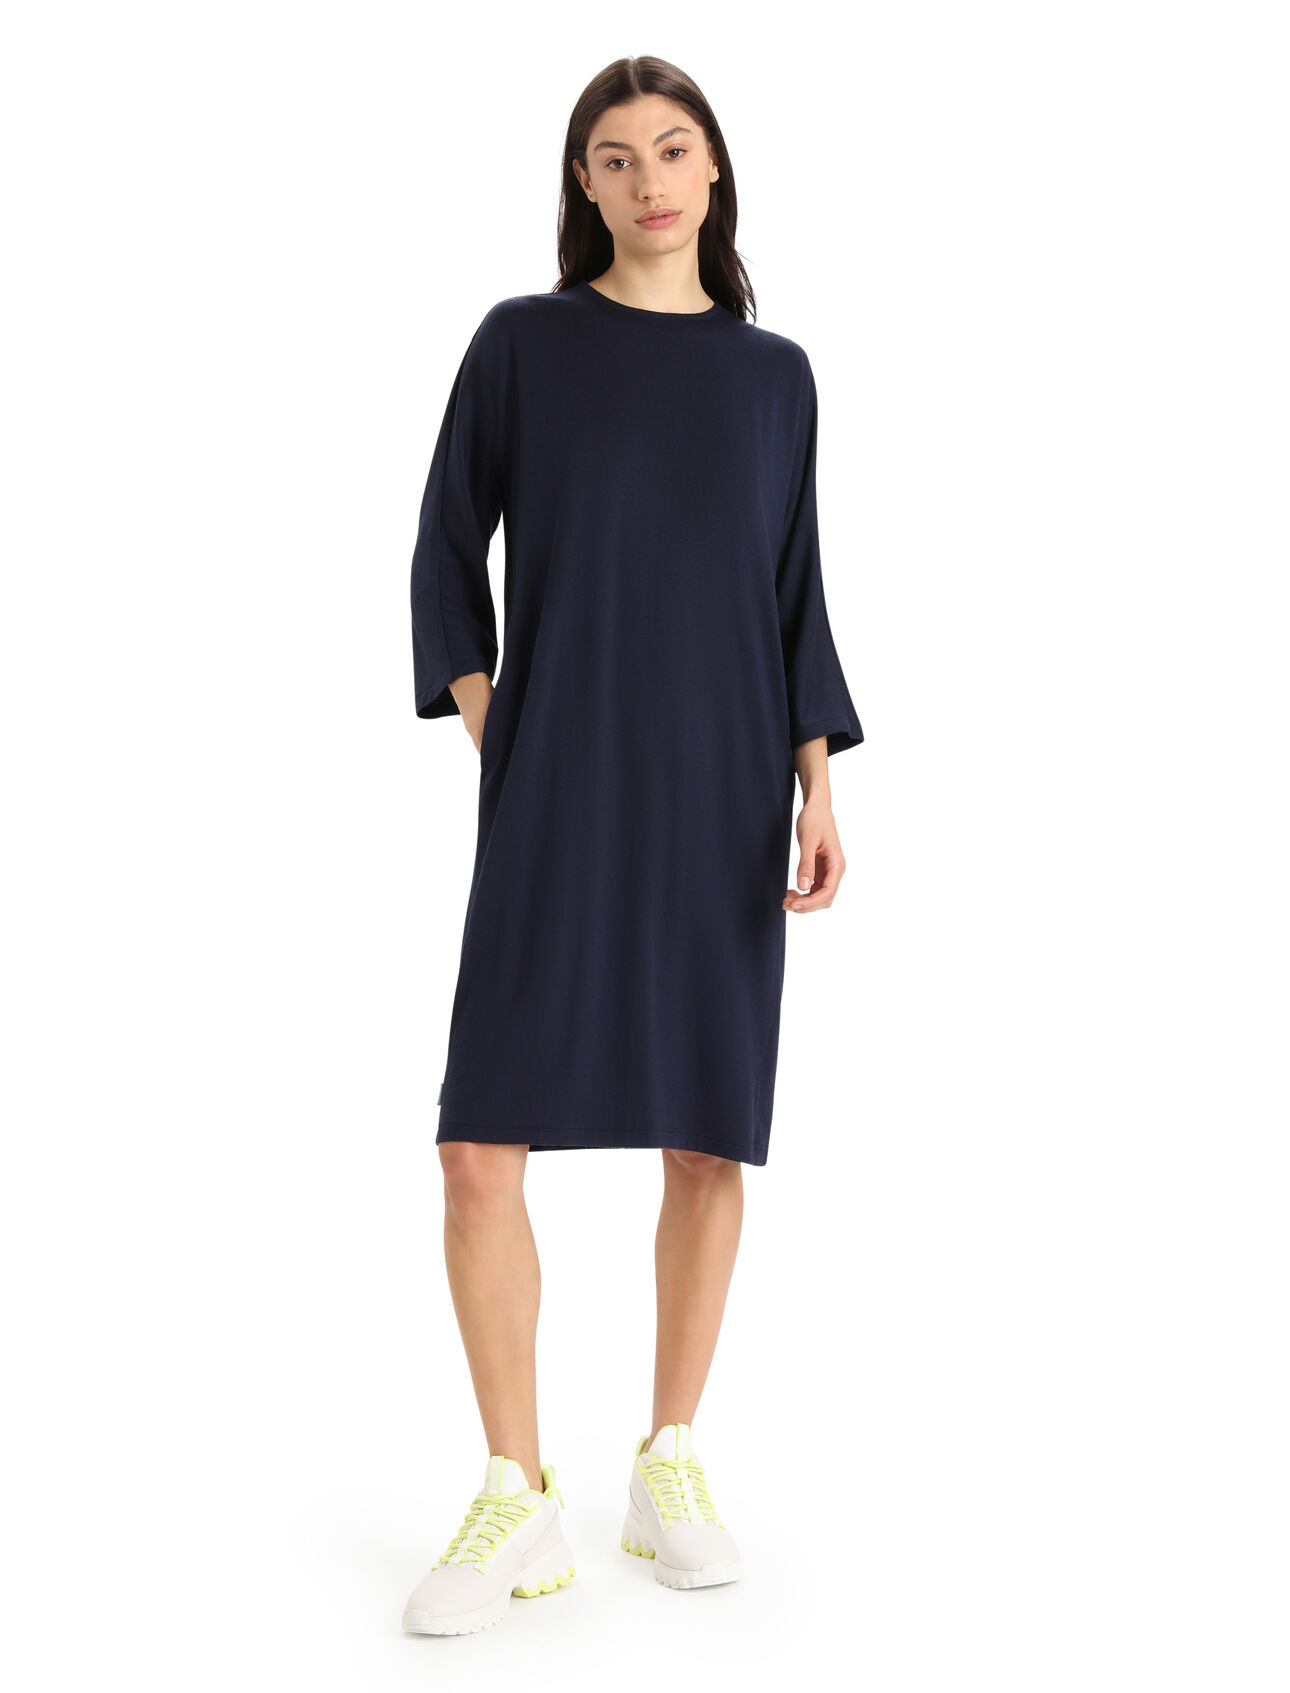 Womens Merino Oasis Long Sleeve Dress A clean, simple and flattering dress made with our best-selling, 100% merino jersey fabric, the Oasis Long Sleeve Dress features a relaxed fit for maximum style and comfort around town.